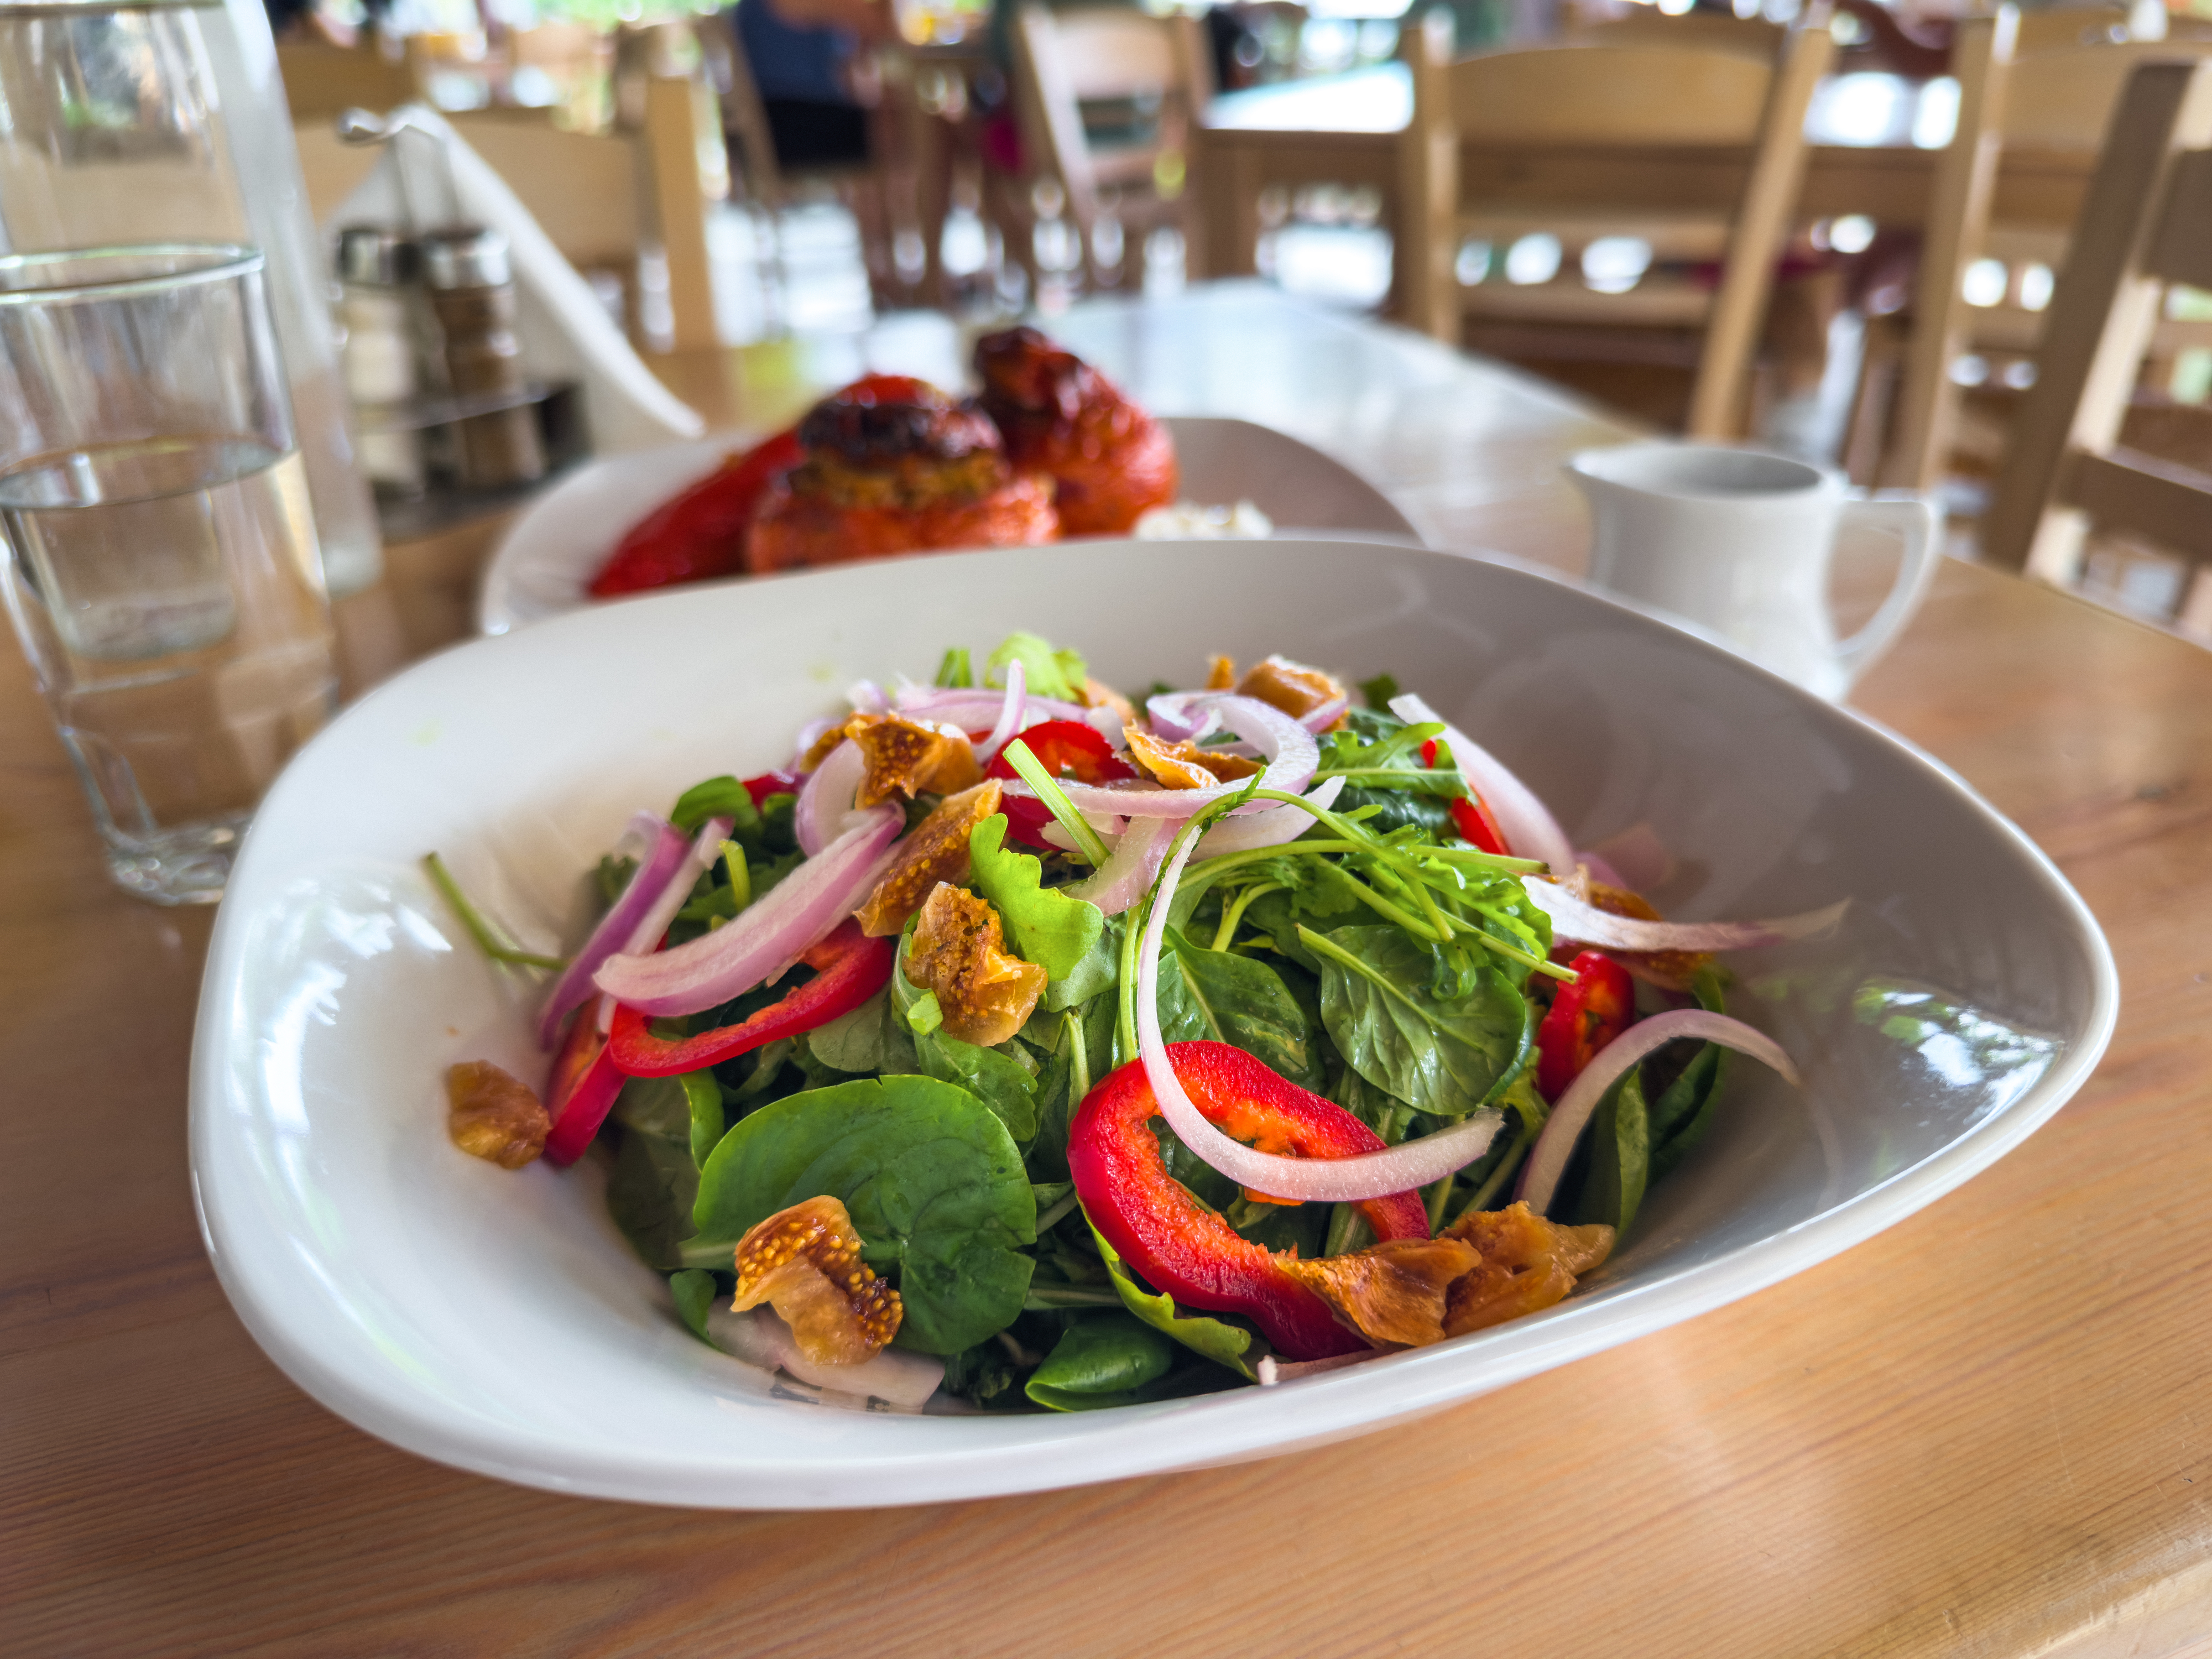 A fresh salad with leafy greens, red bell pepper strips, thinly sliced onions, and fig pieces in a white bowl, set on a wooden table in a restaurant